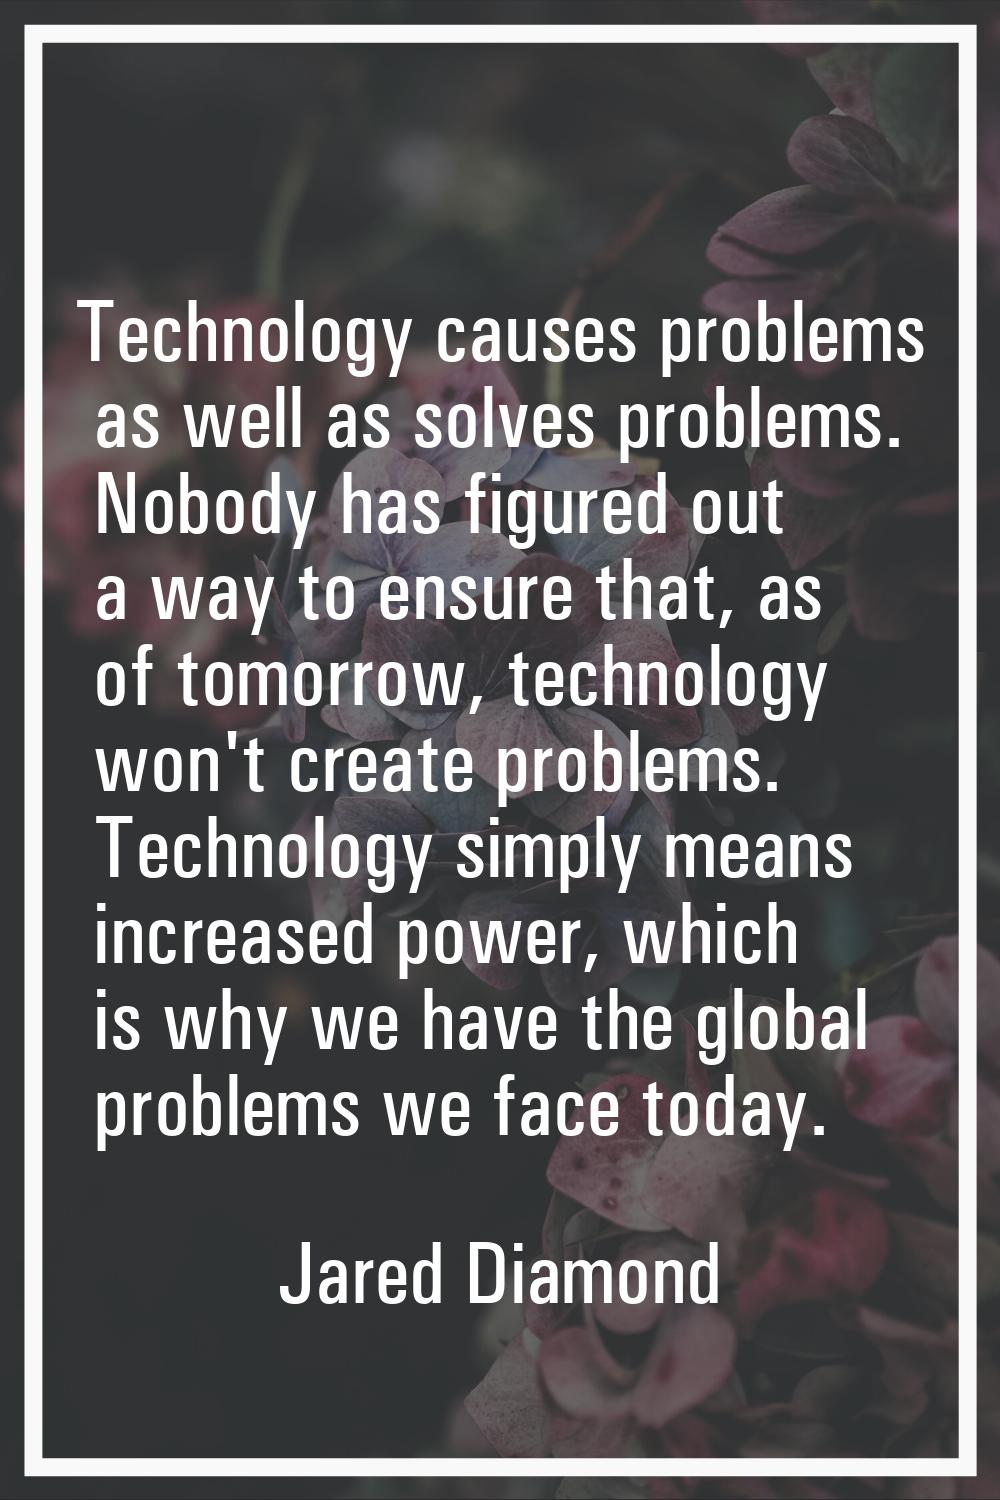 Technology causes problems as well as solves problems. Nobody has figured out a way to ensure that,